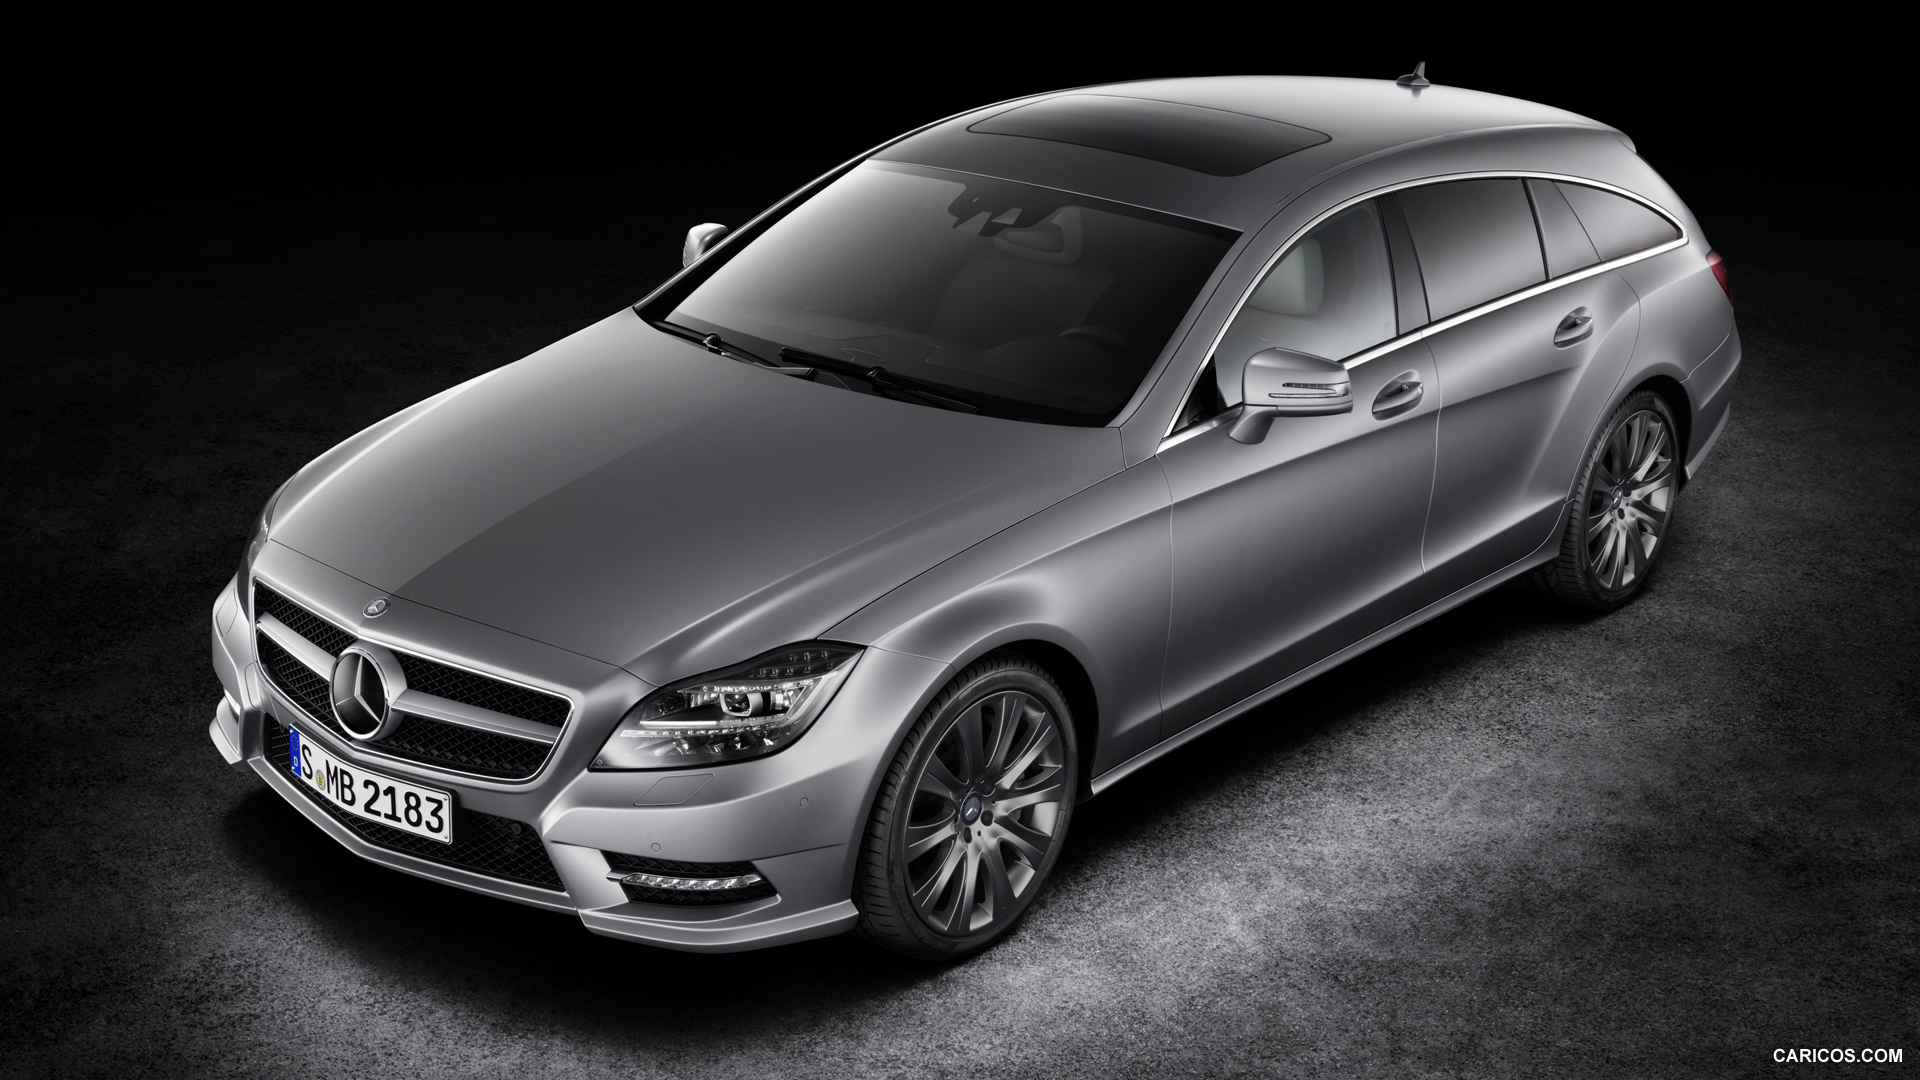 2013 Mercedes-Benz CLS 500 Shooting Brake - Front, #117 of 184